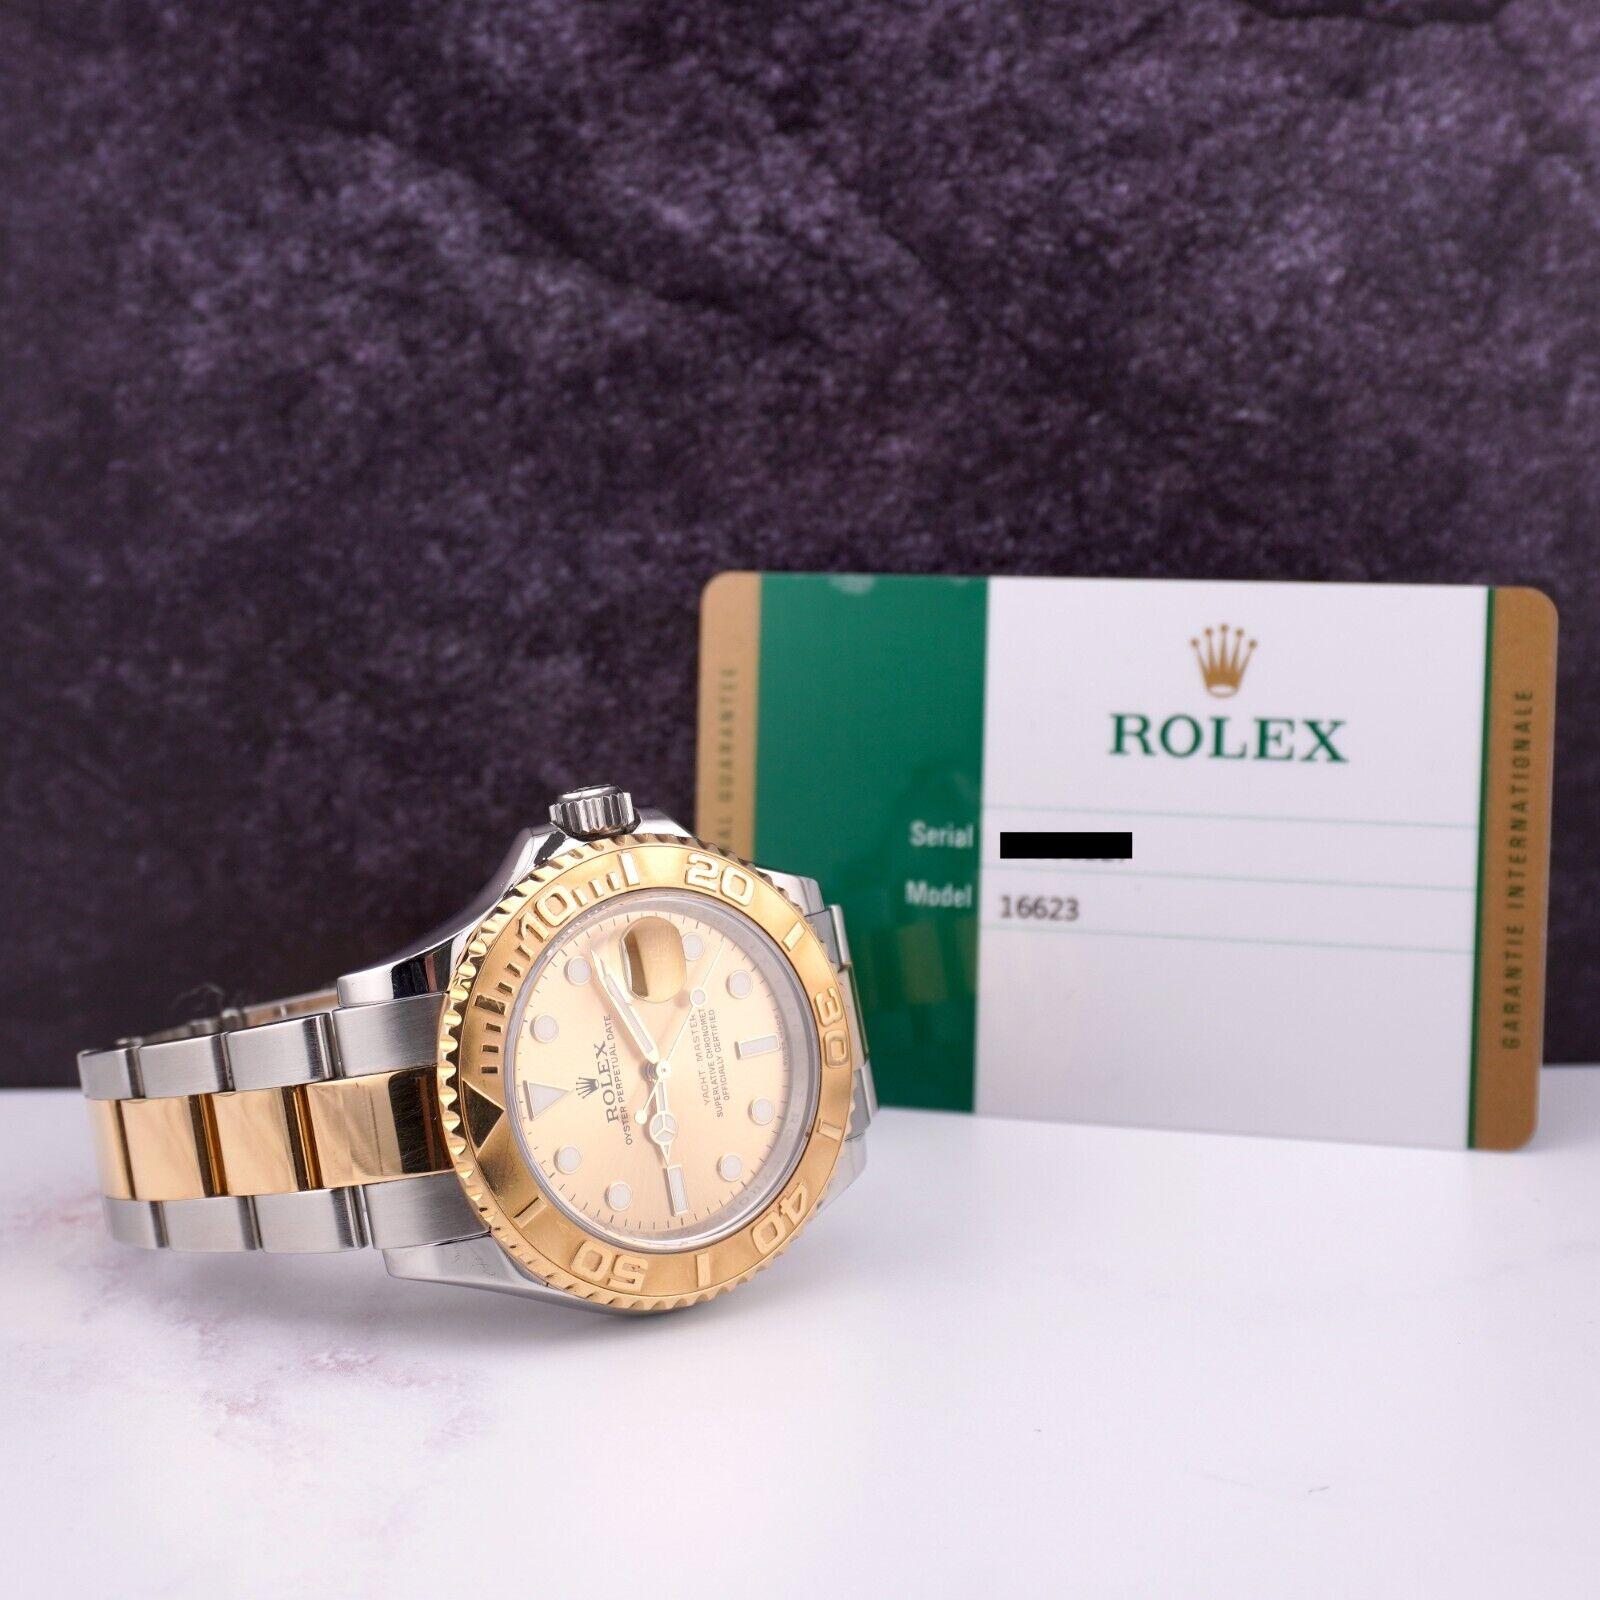 Rolex Yacht-Master 40mm Oyster Date 18k Yellow Gold & Steel Watch Dial 16623 For Sale 3